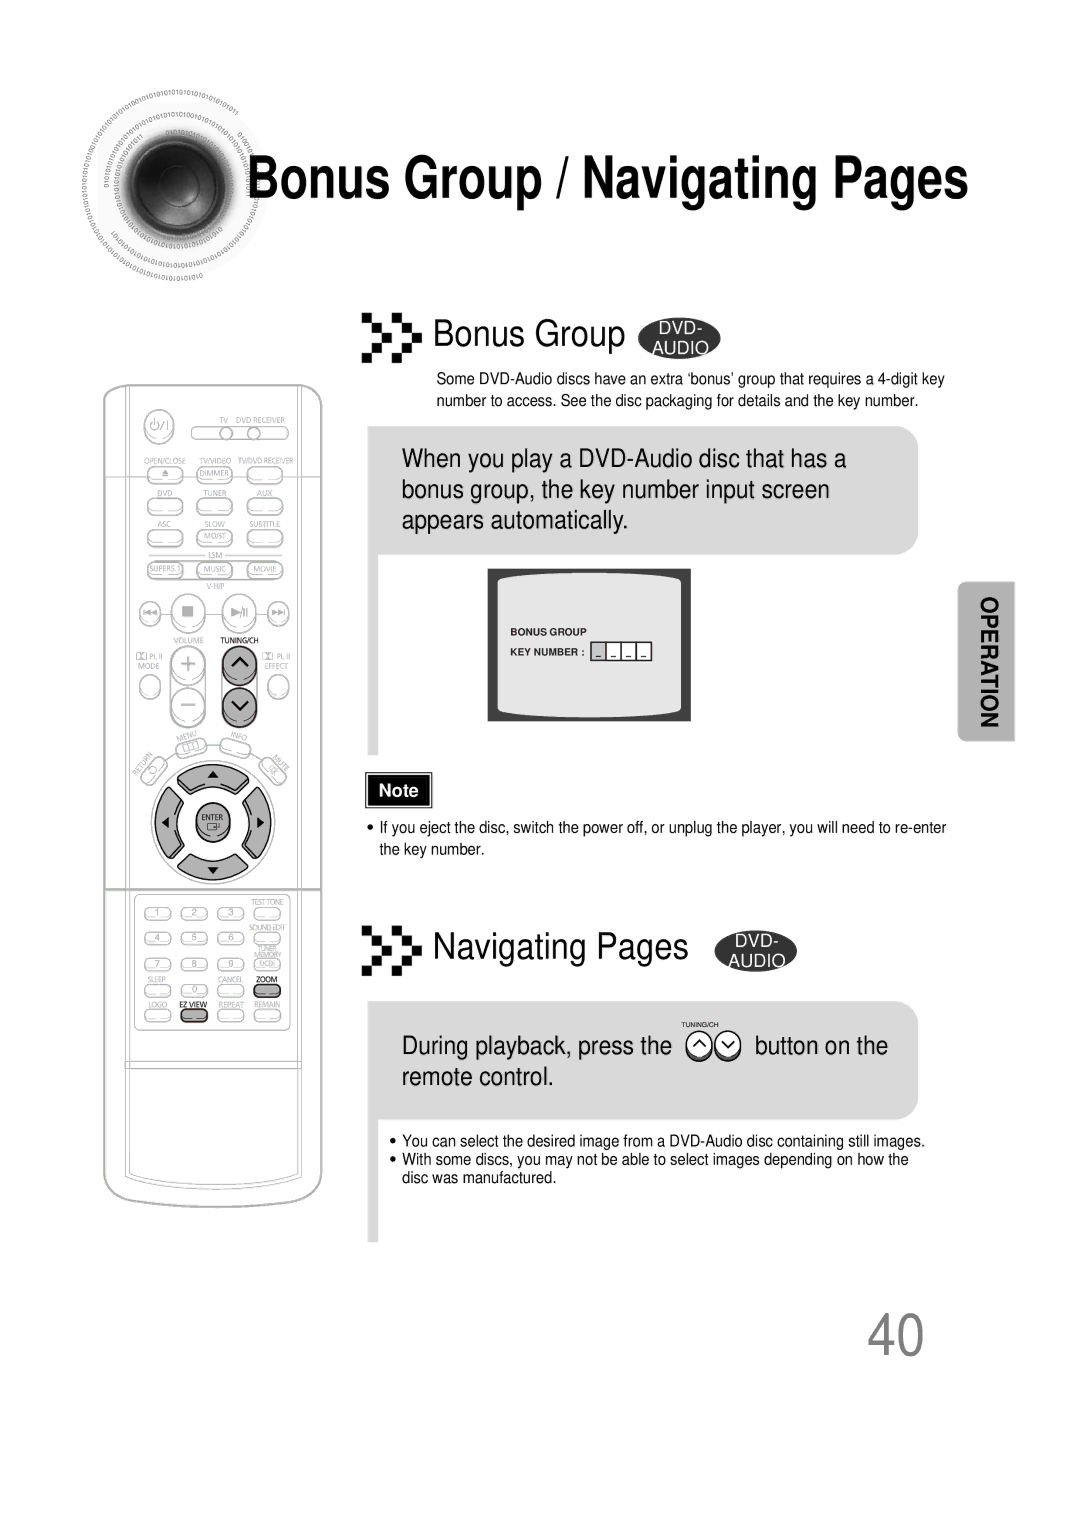 Samsung HT-DS1000 Bonus Group / Navigating Pages, During playback, press the button on the remote control 